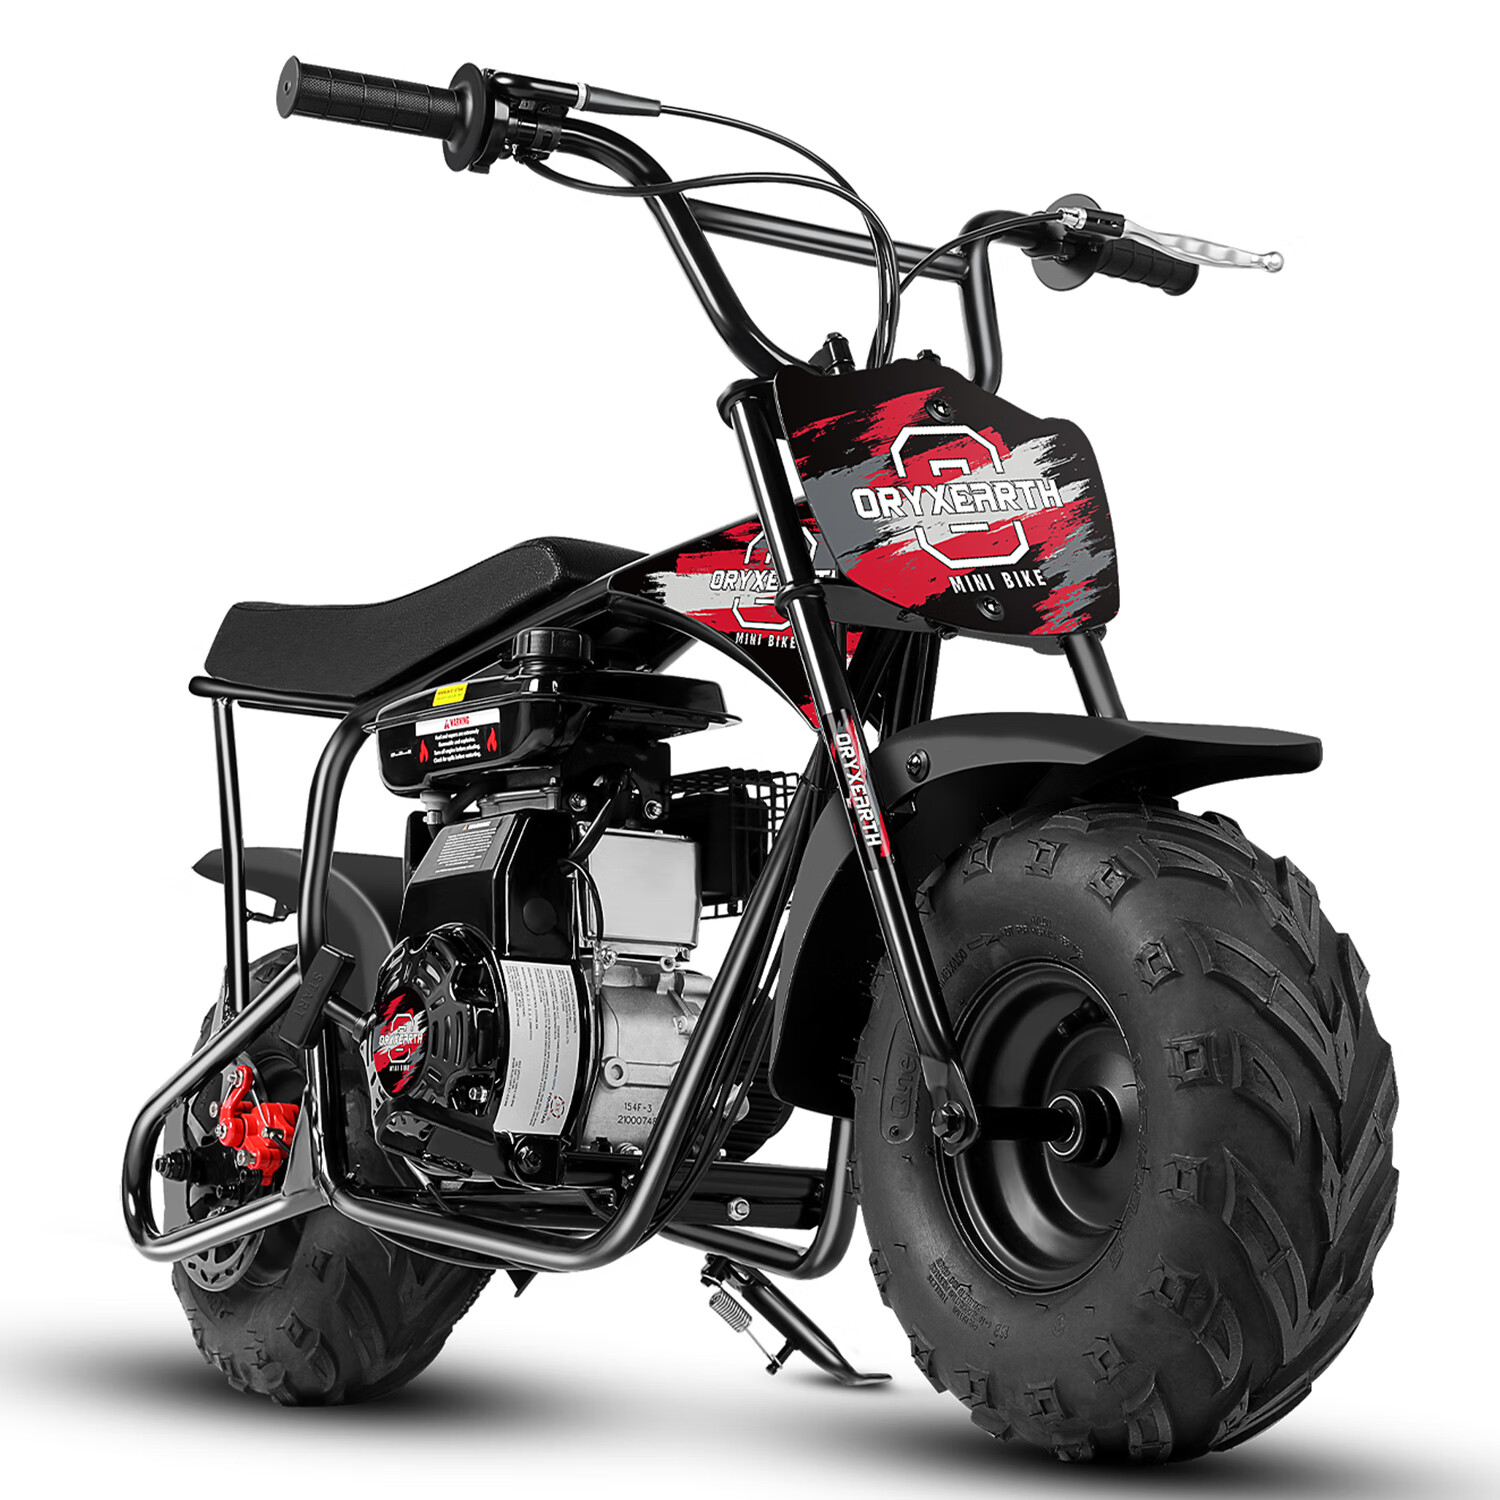 Oryxearth Mini Bike for Kids Motorcycle, Gas Power Dirt Bike,105CC 4-Stroke Ride on Toys, Racing - image 1 of 8